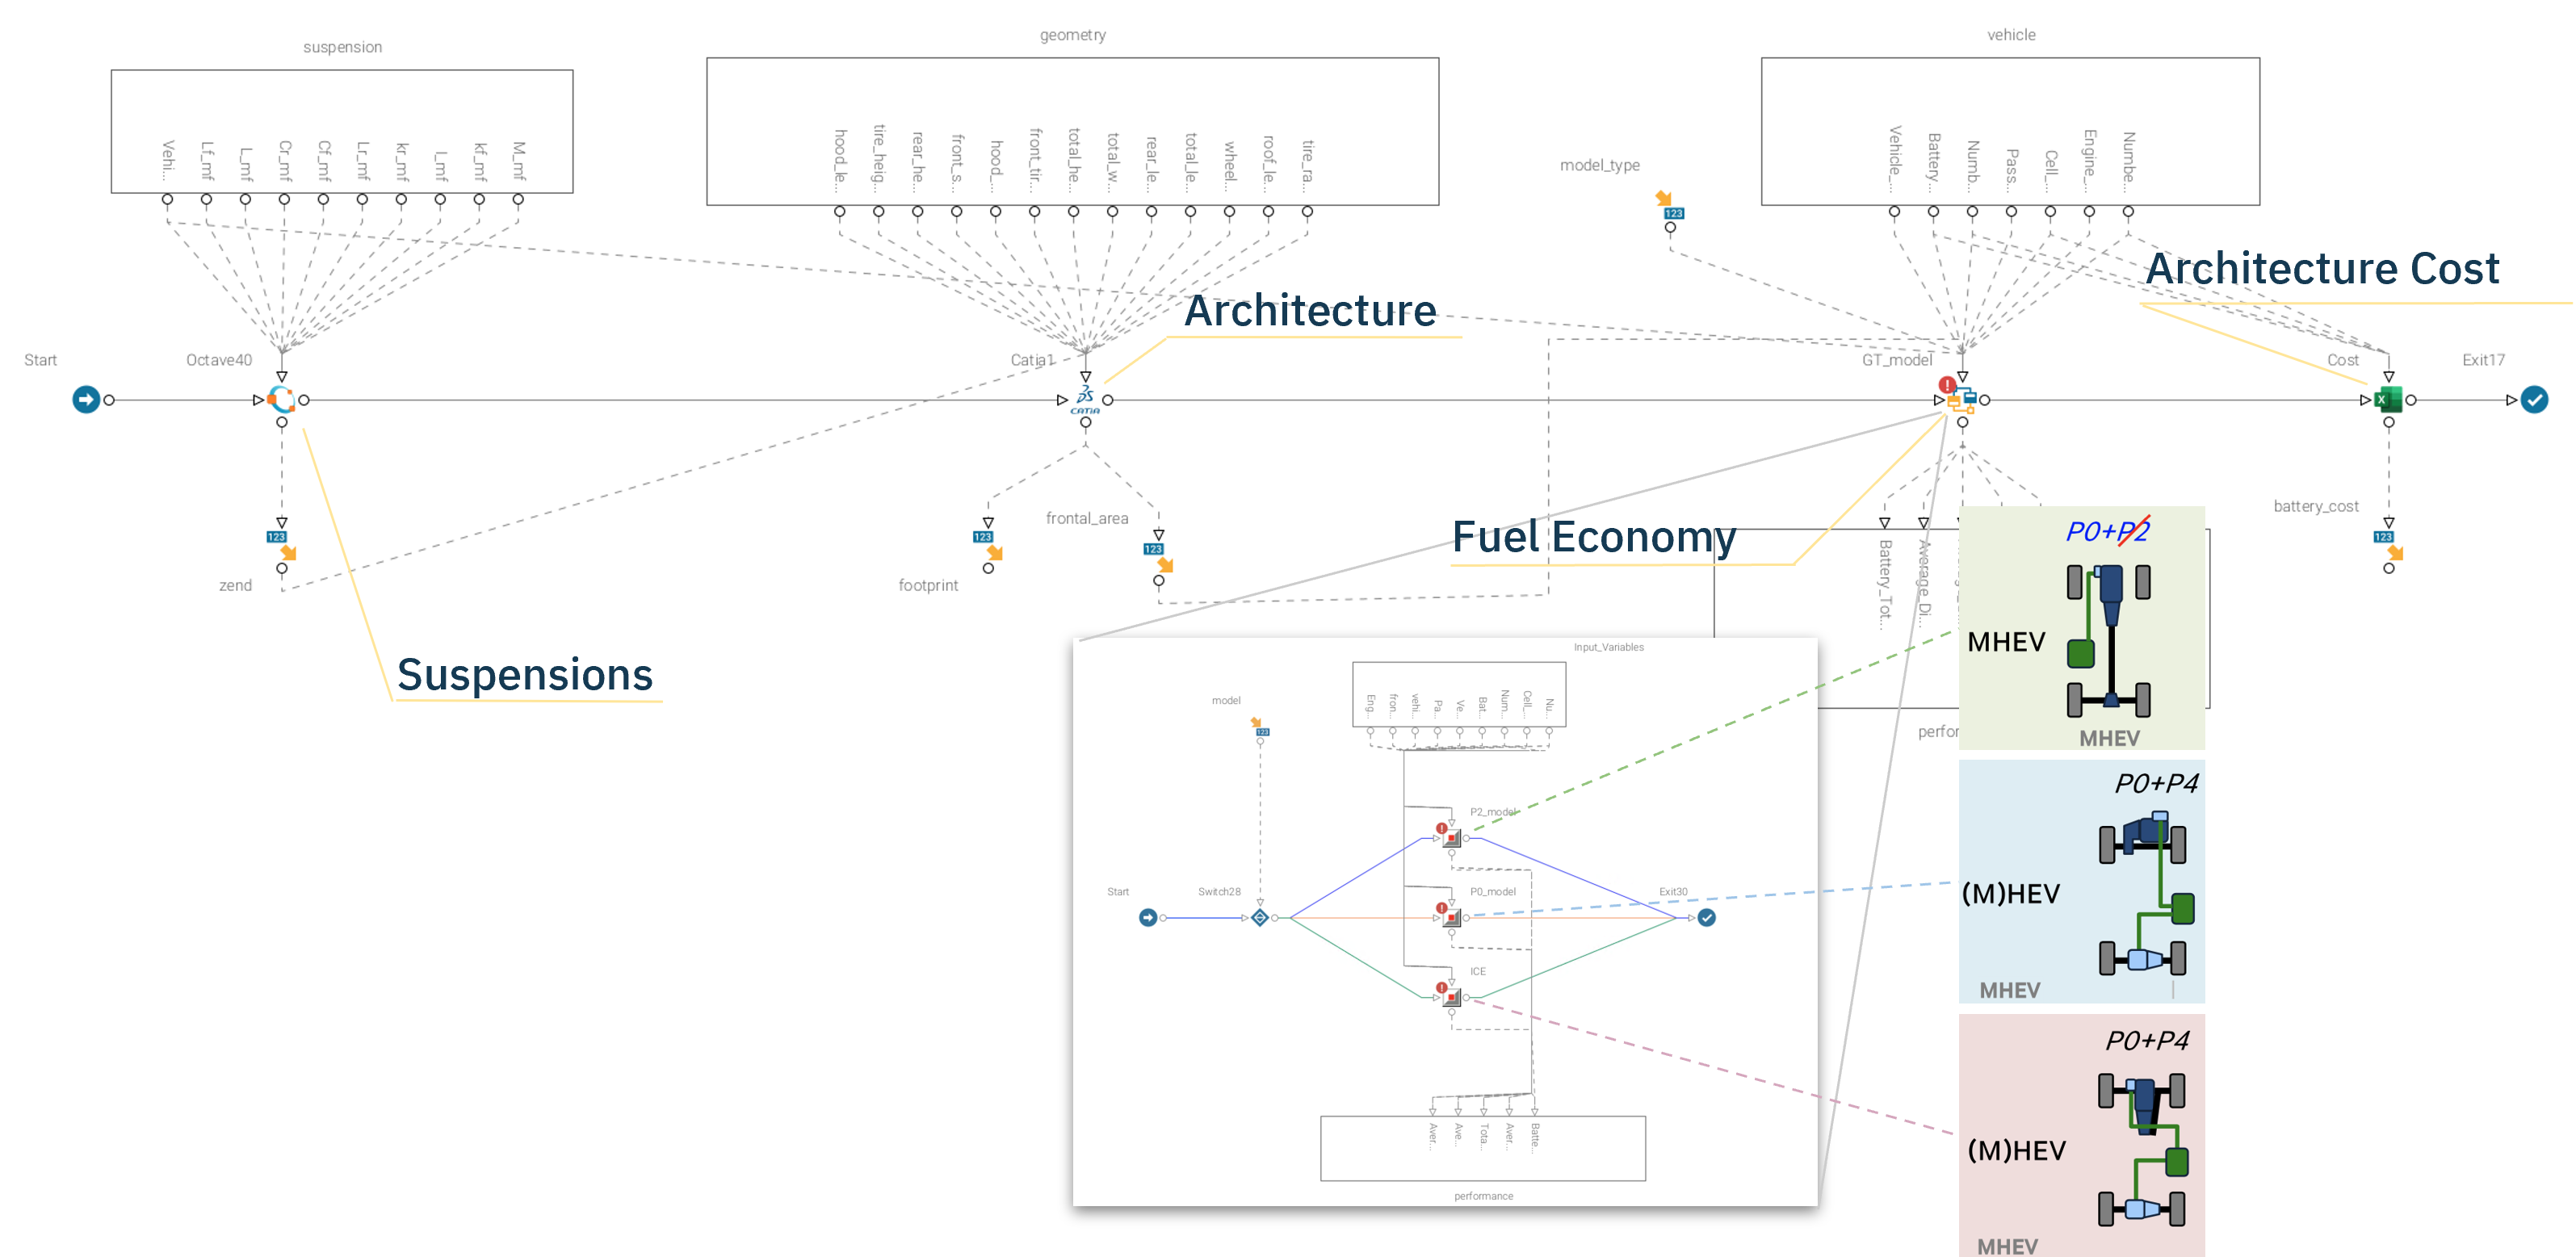 modeFRONTIER Multidisciplinary Design Exploration workflow used for Trade Space Analysis